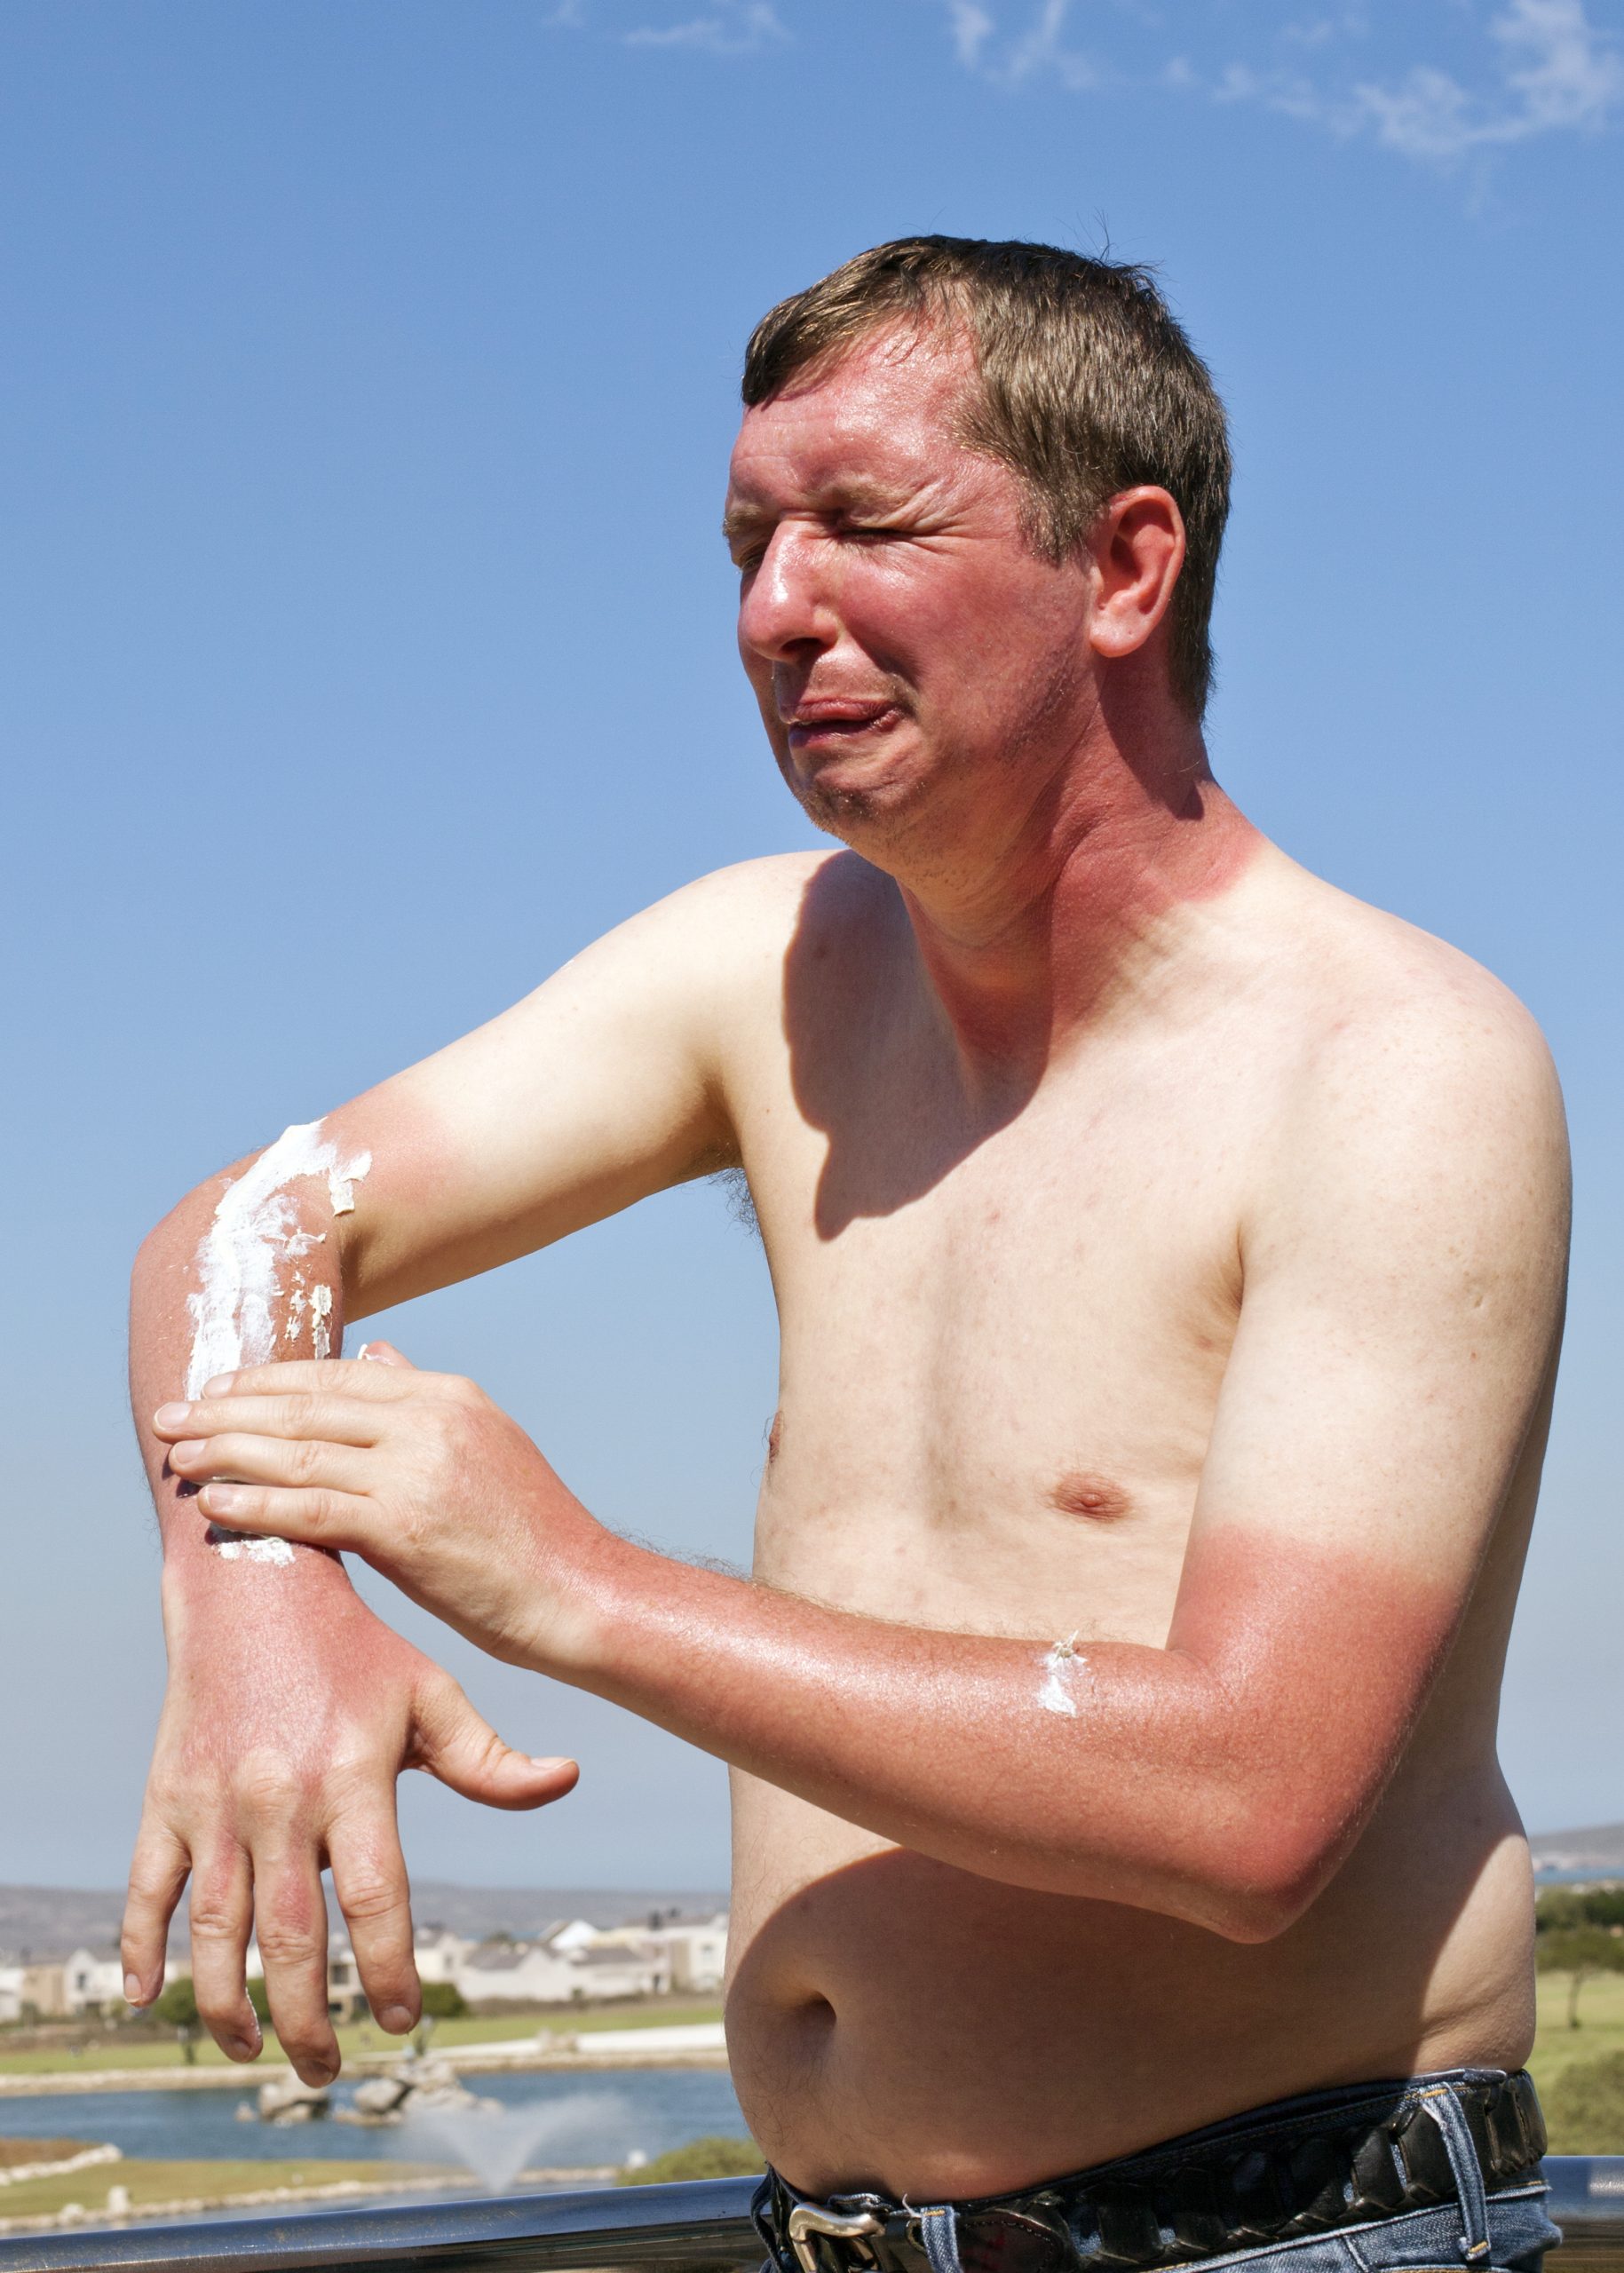 My ‘unorthodox’ trick will drastically reduce your discomfort when you get a sunburn – sounds weird but it works